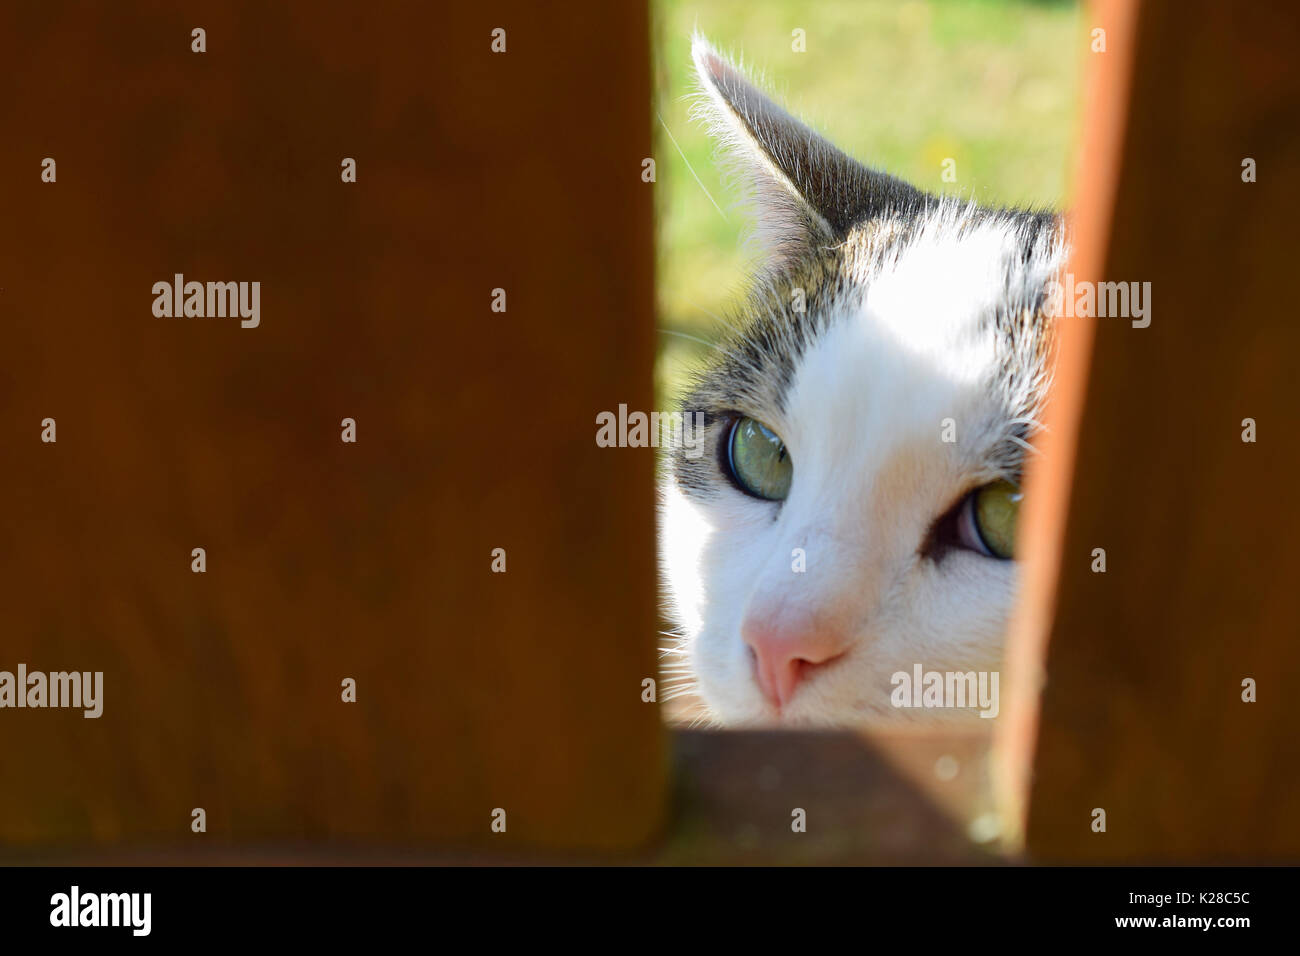 Domestic cat peeking from behind wooden fence and looking at camera. Stock Photo